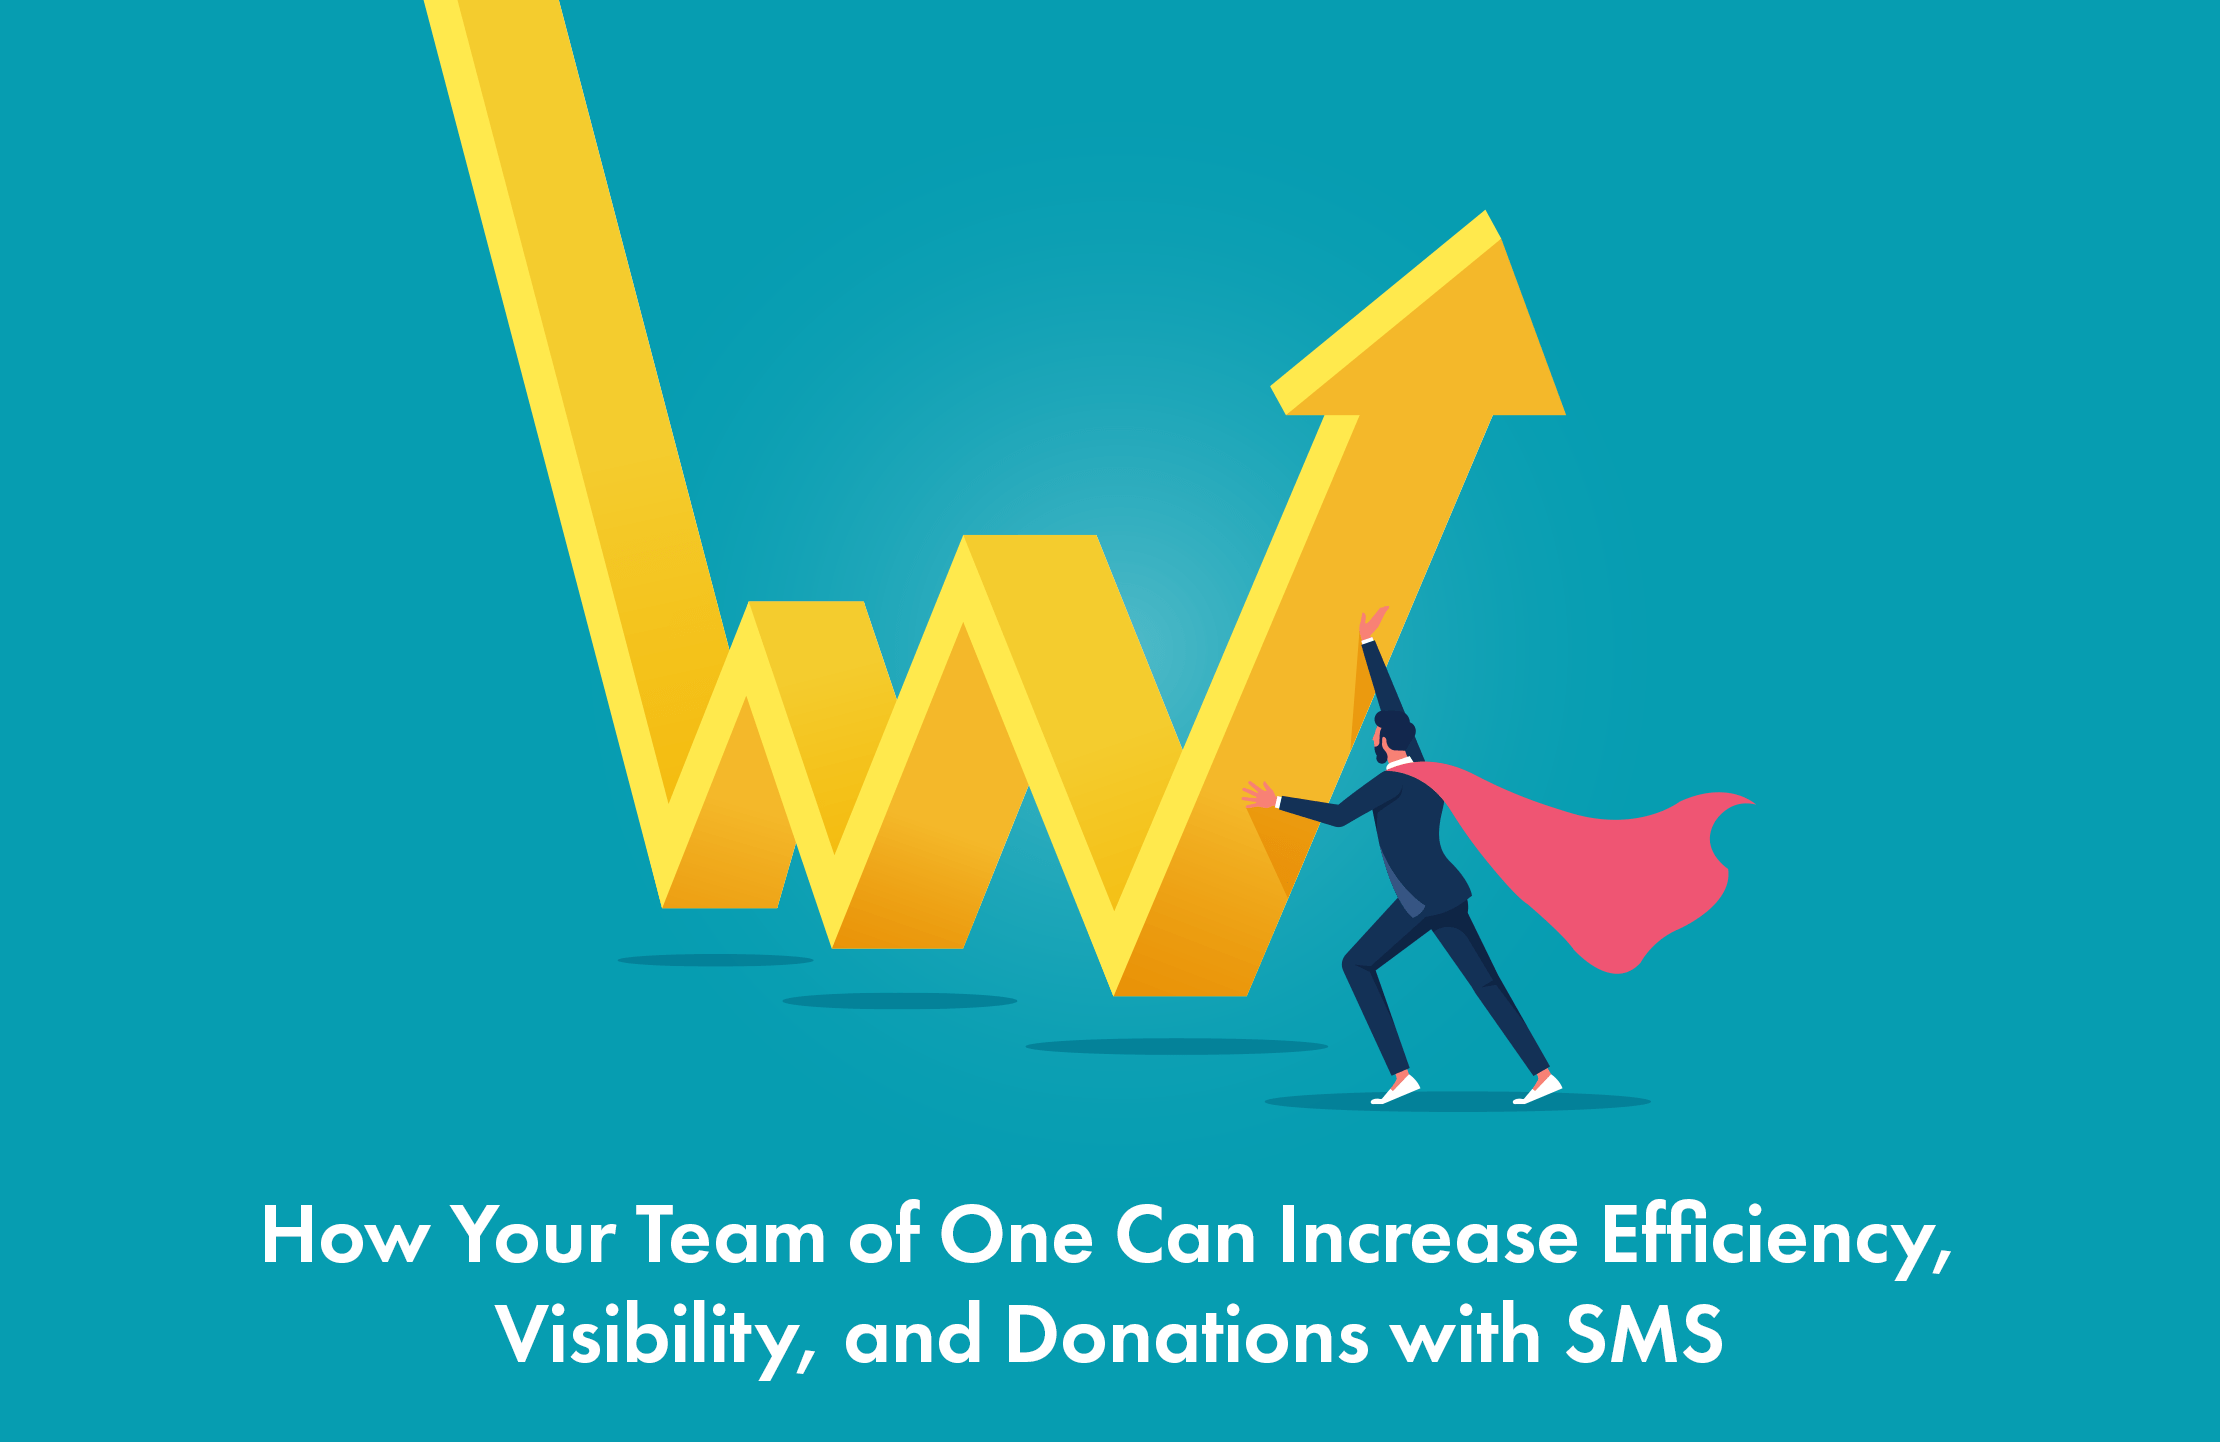 How Your Team of One Can Increase Efficiency, Visibility, and Donations with SMS